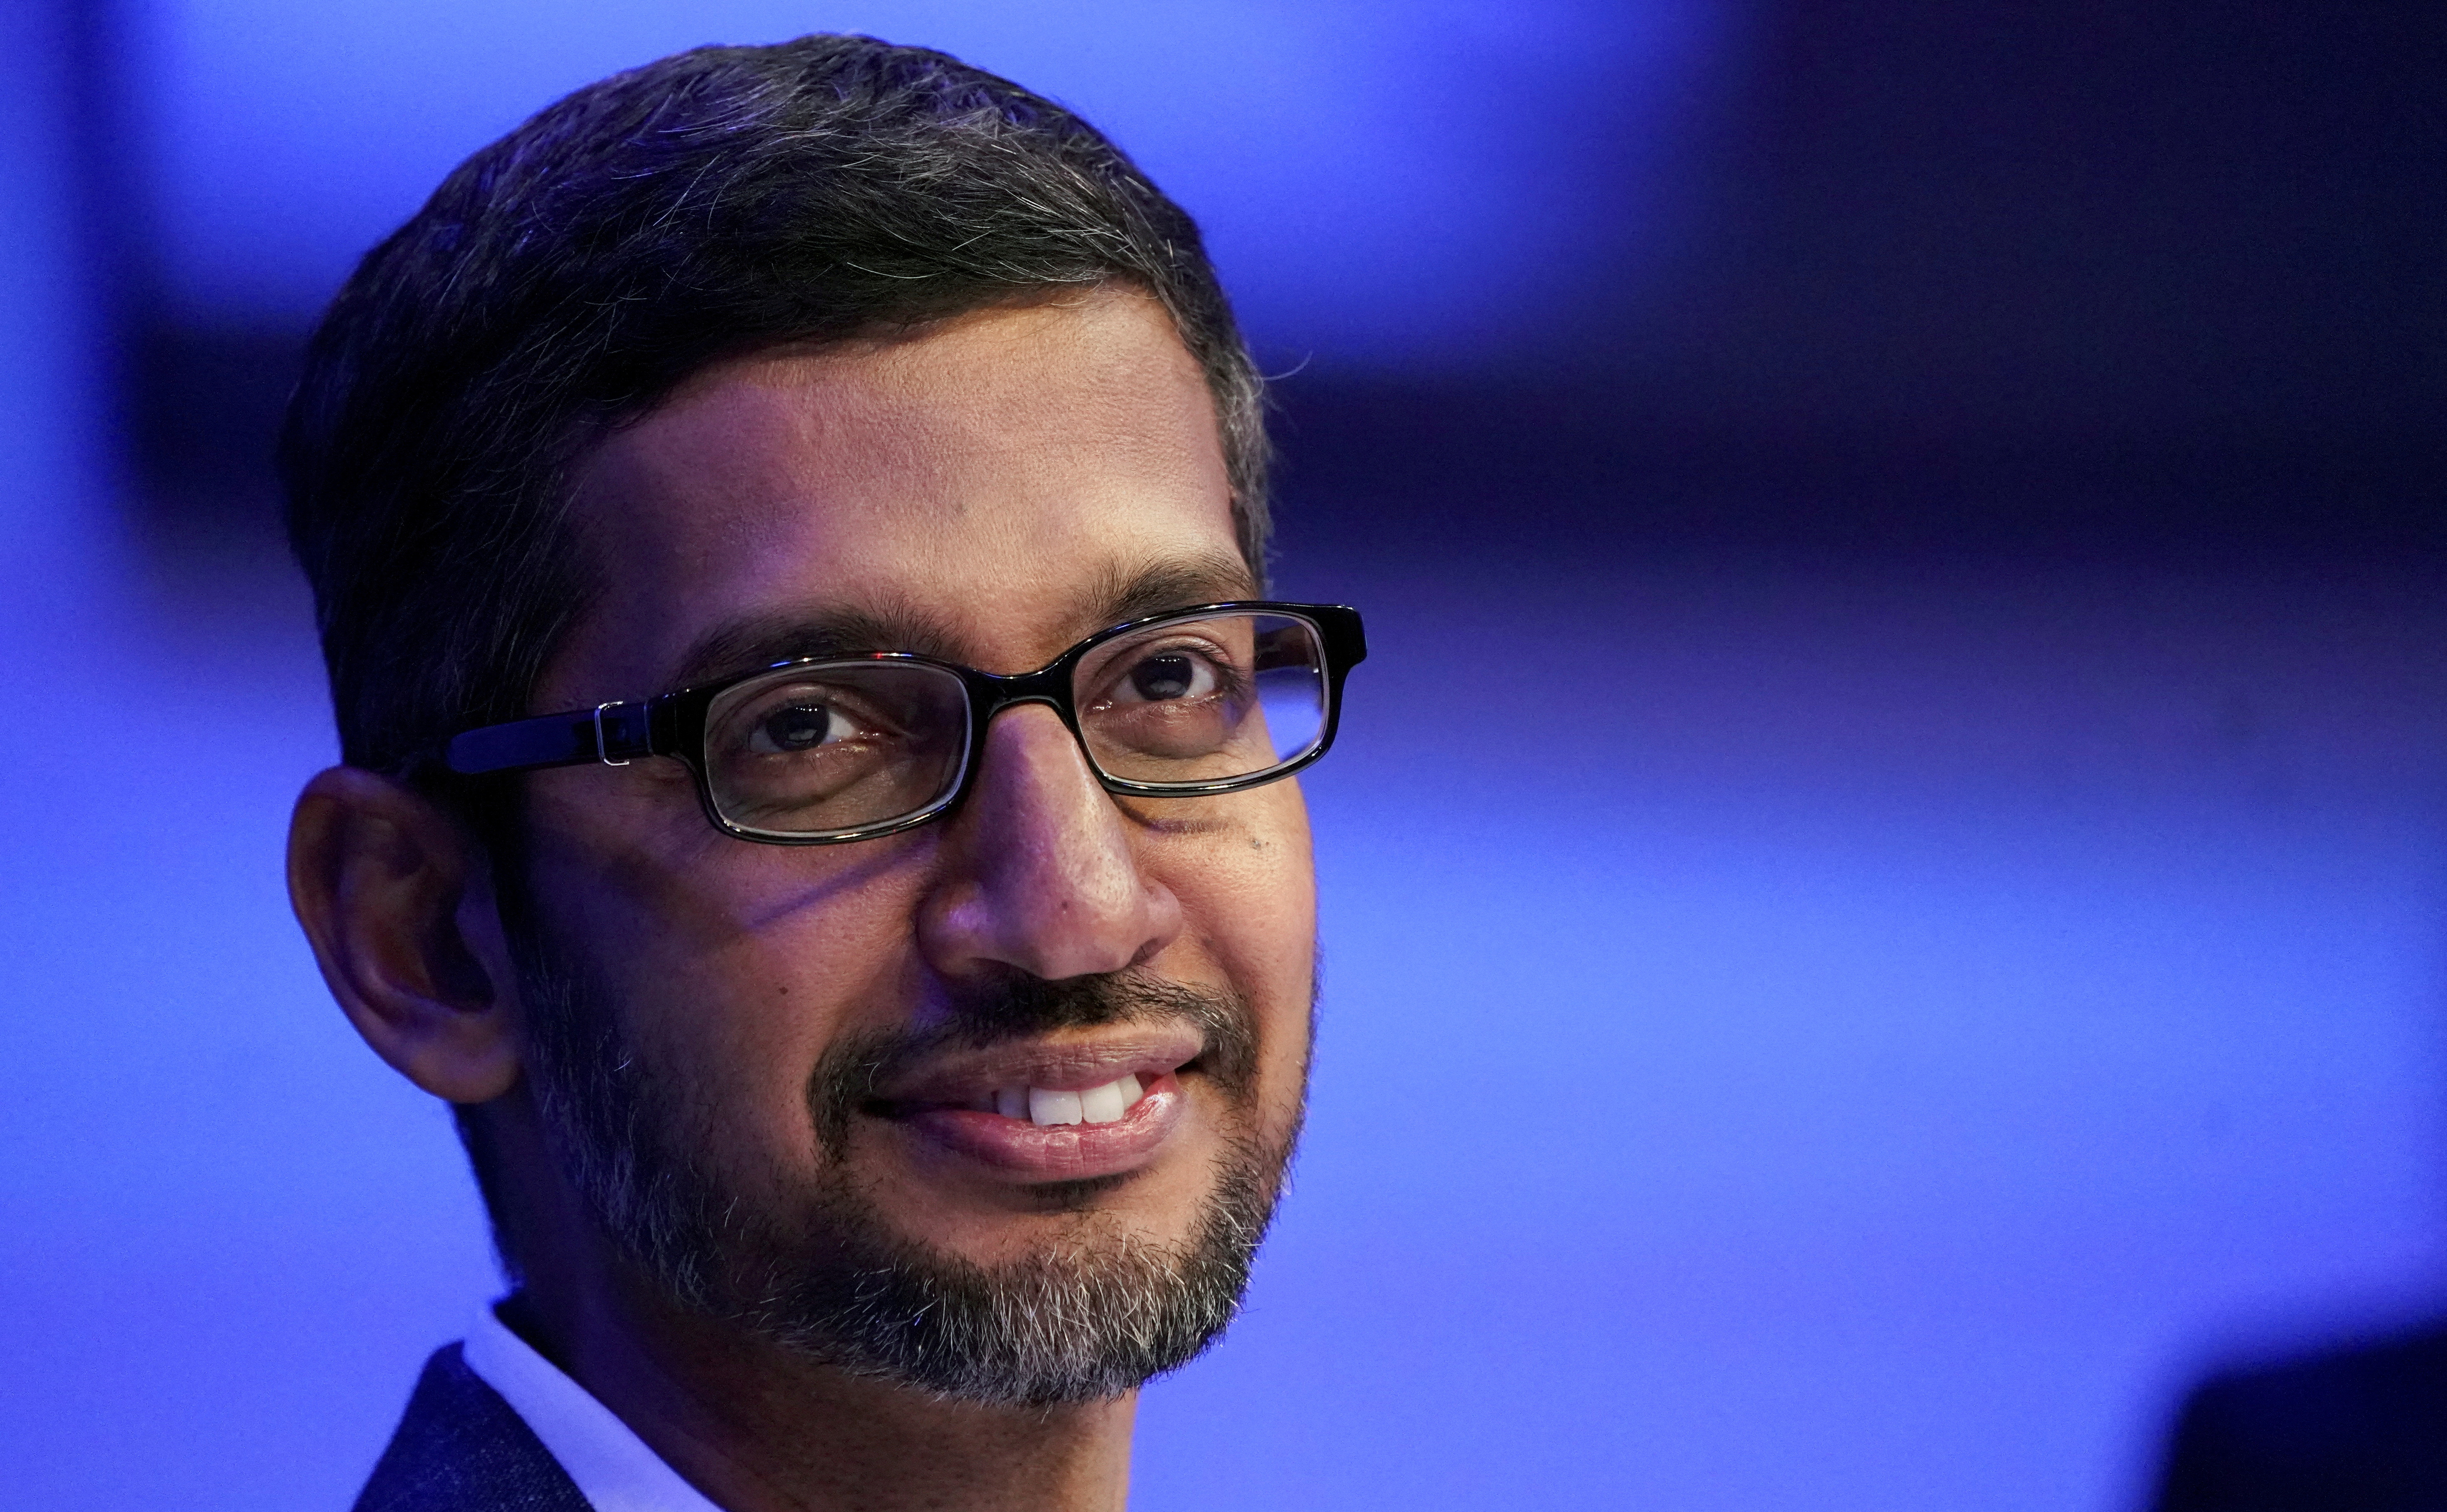 Sundar Pichai, chief executive officer of Alphabet, looks on during a session in Davos